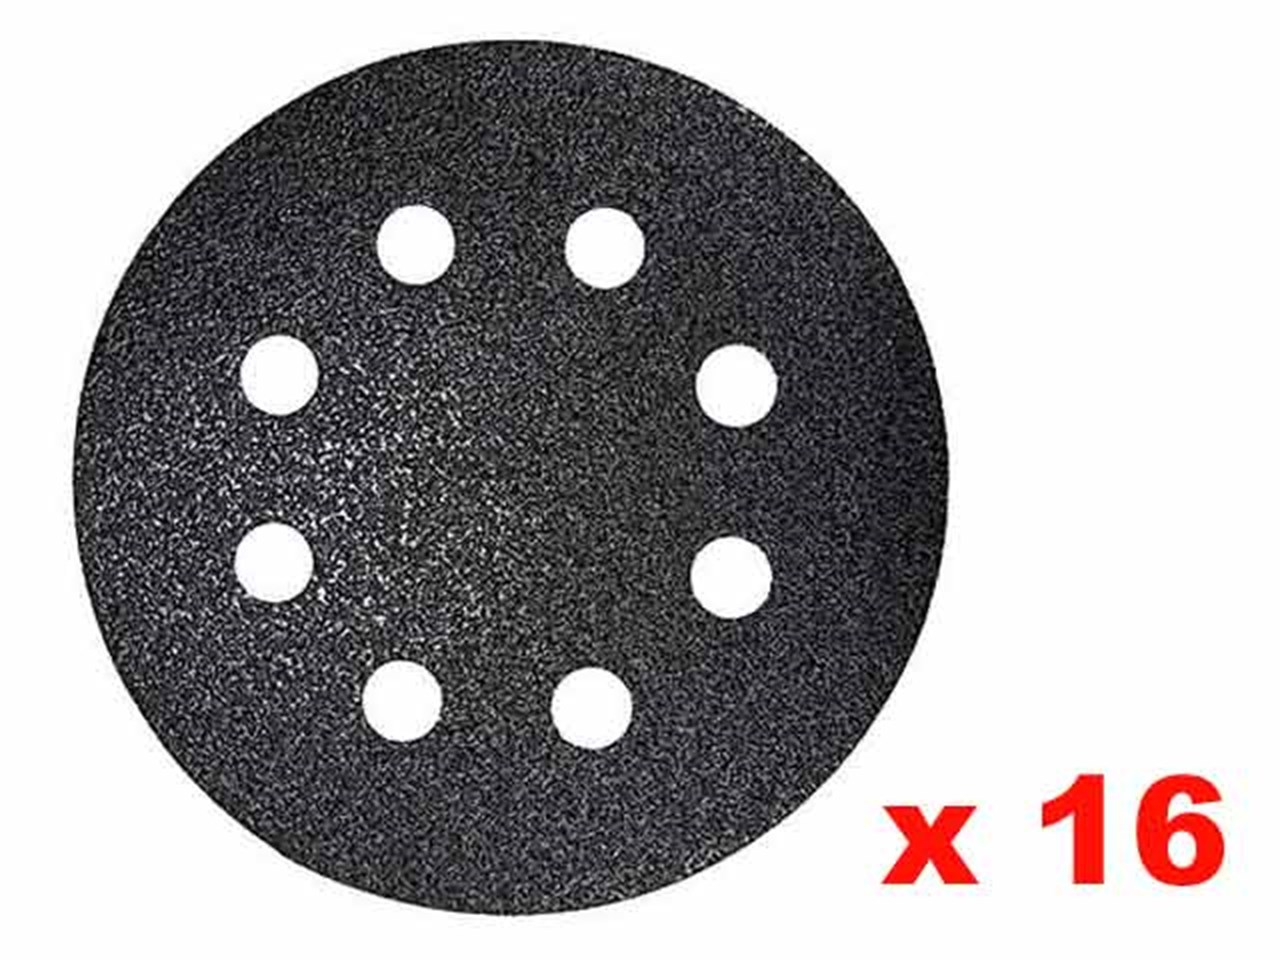 Fein 63717229010 115mm Sanding Disc Perforated 120 Grit6